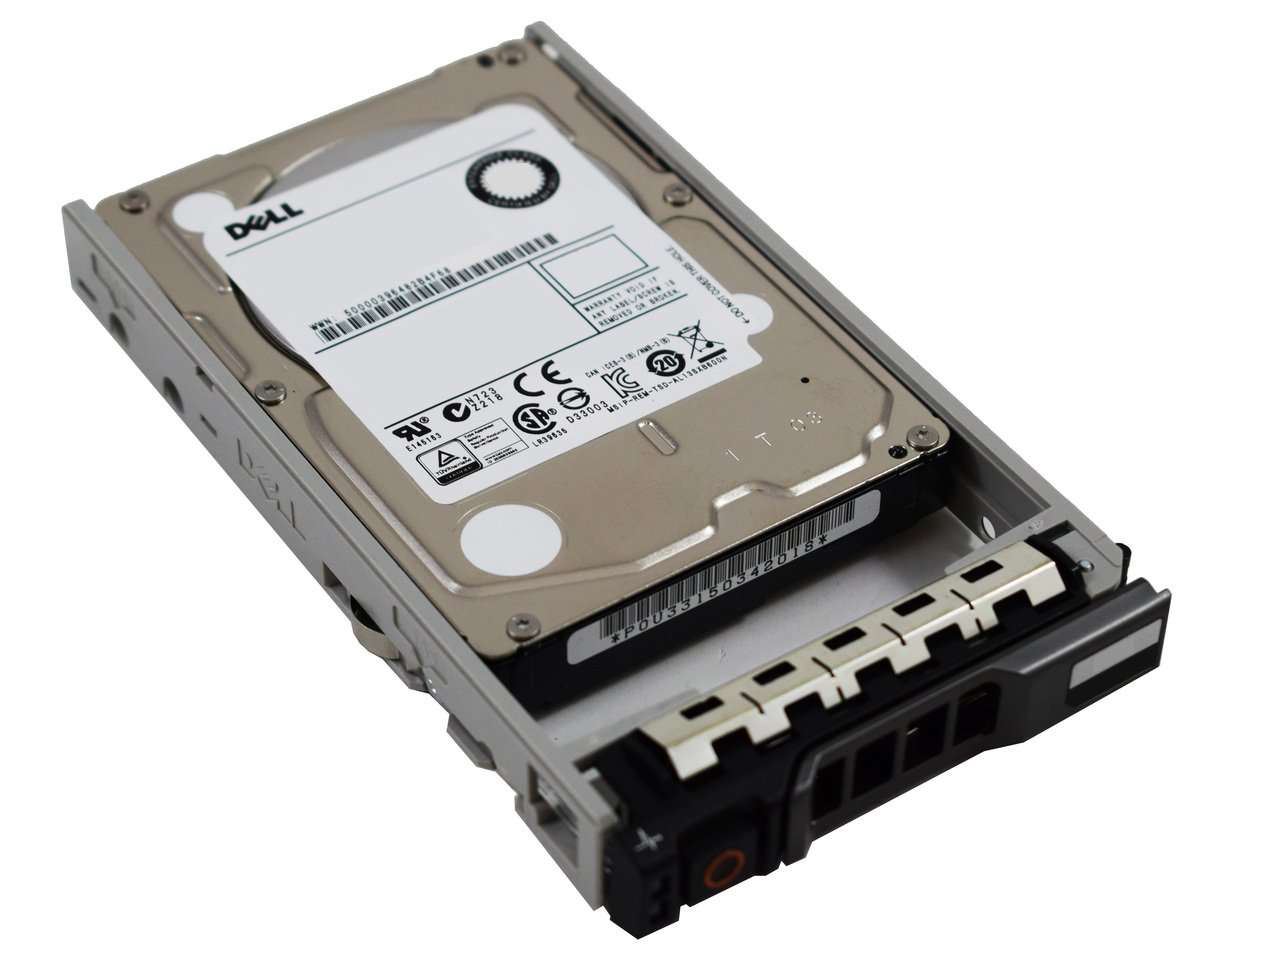 Dell G13 342-4150 600GB 10K RPM SAS 6Gb/s 512n 2.5" Manufacturer Recertified HDD